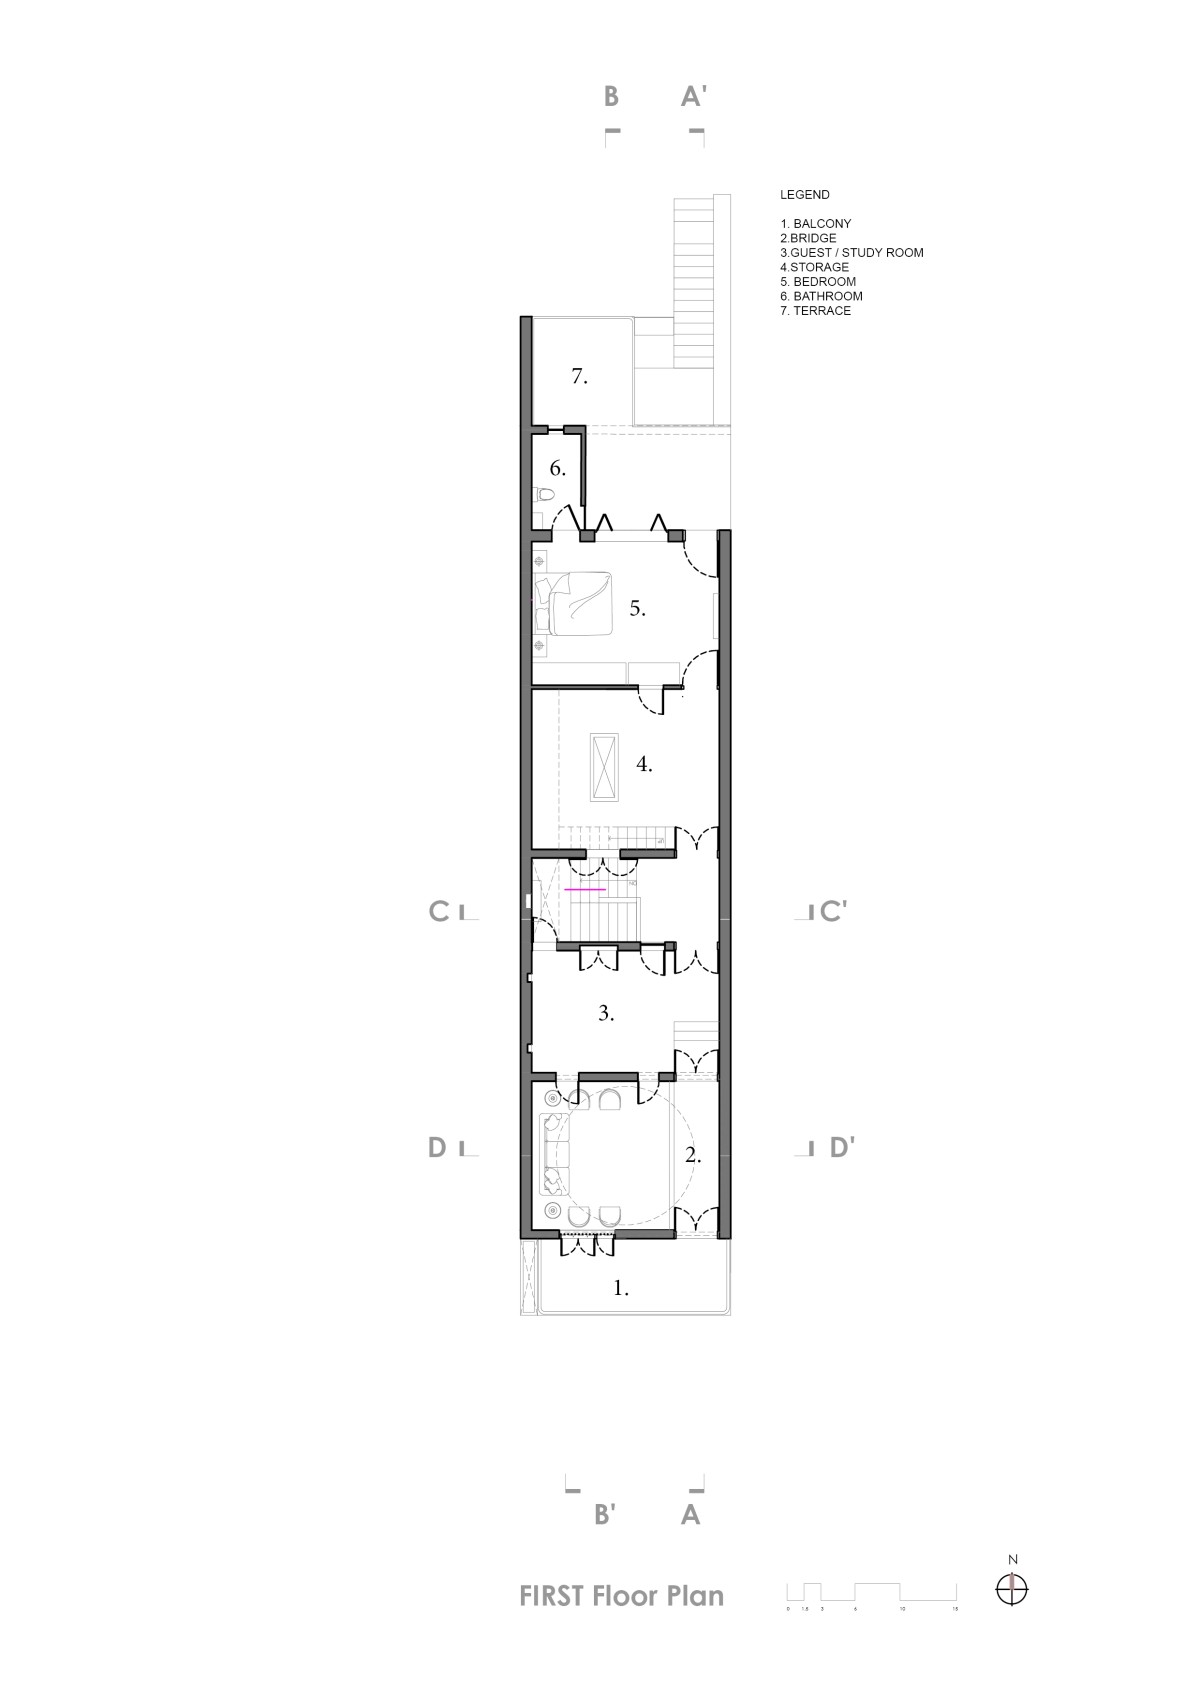 First floor plan of Continuum House by Project Terra